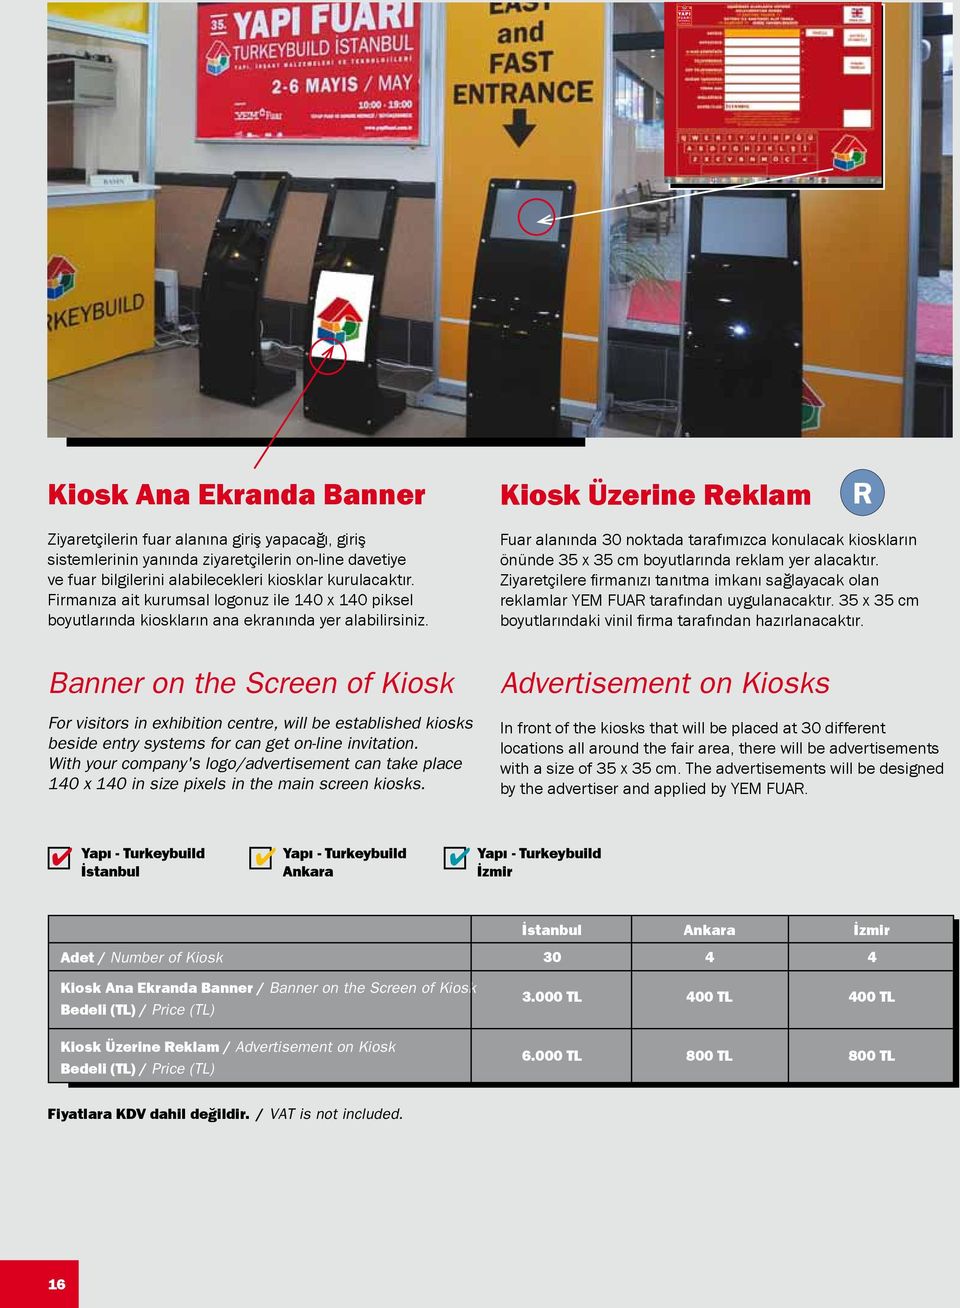 Banner on the Screen of Kiosk For visitors in exhibition centre, will be established kiosks beside entry systems for can get on-line invitation.